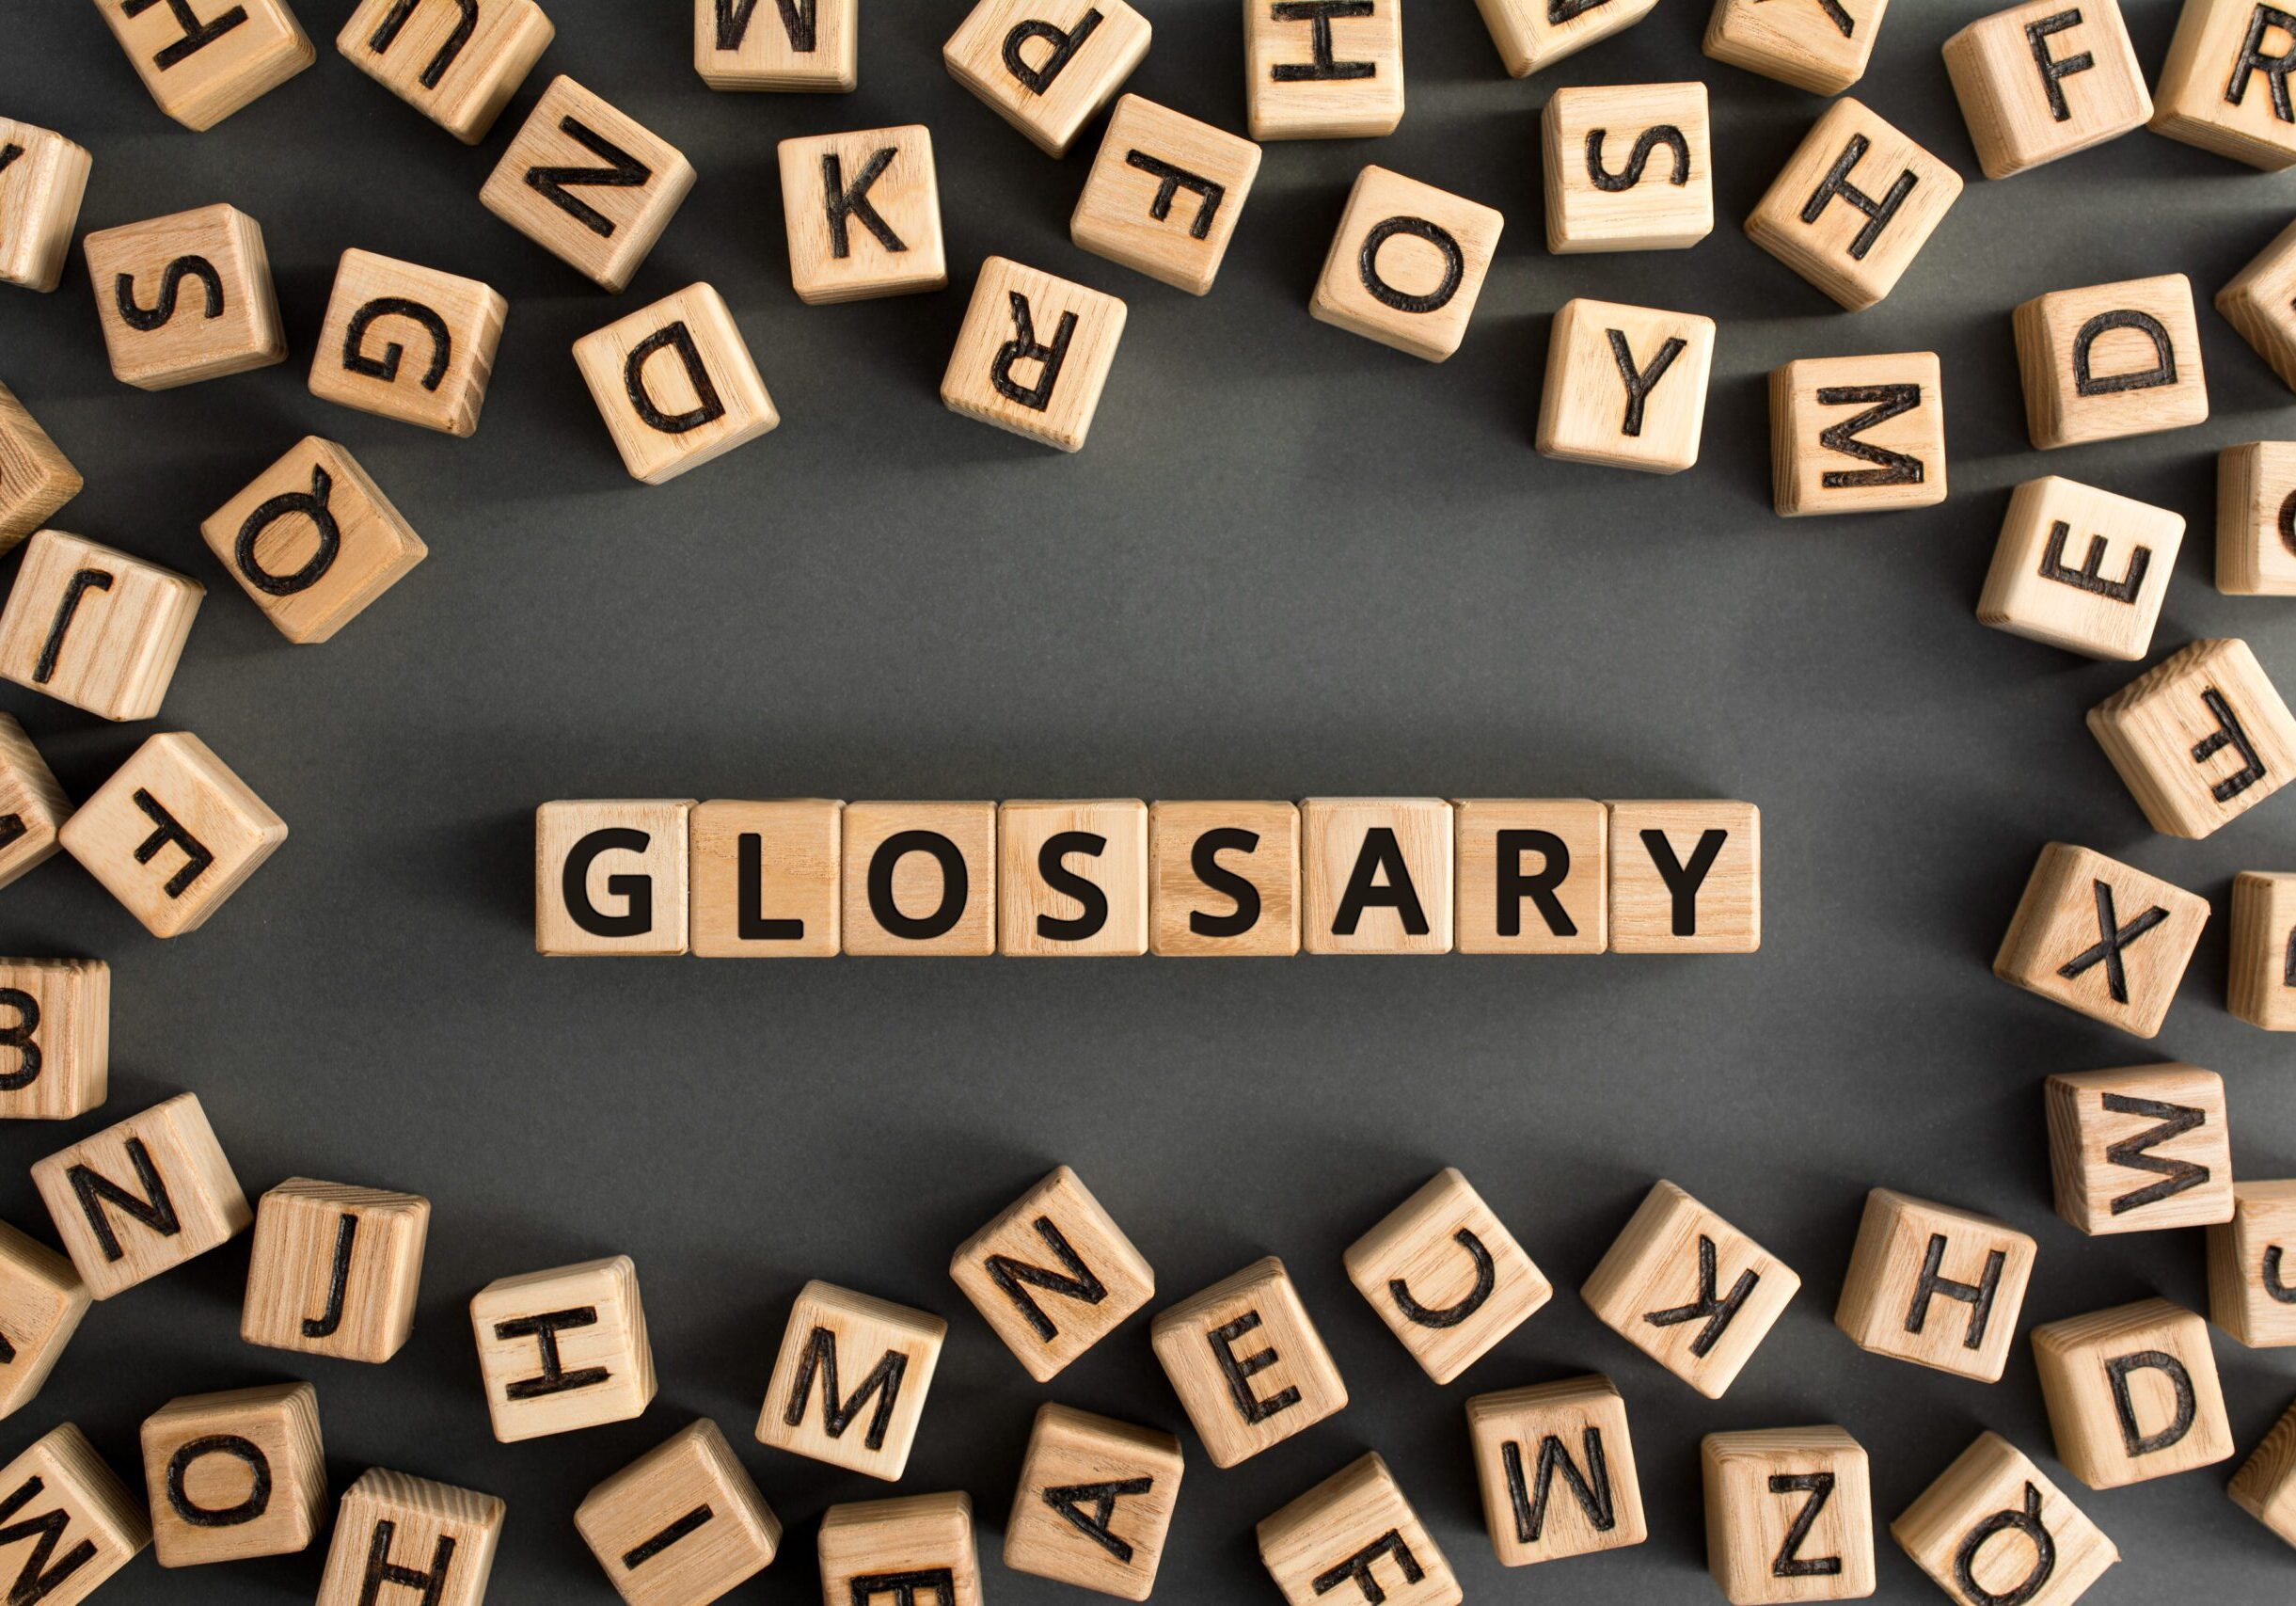 Glossary - word from wooden blocks with letters, alphabetical list with words meanings dictionary glossary  concept, random letters around, top view on grey background